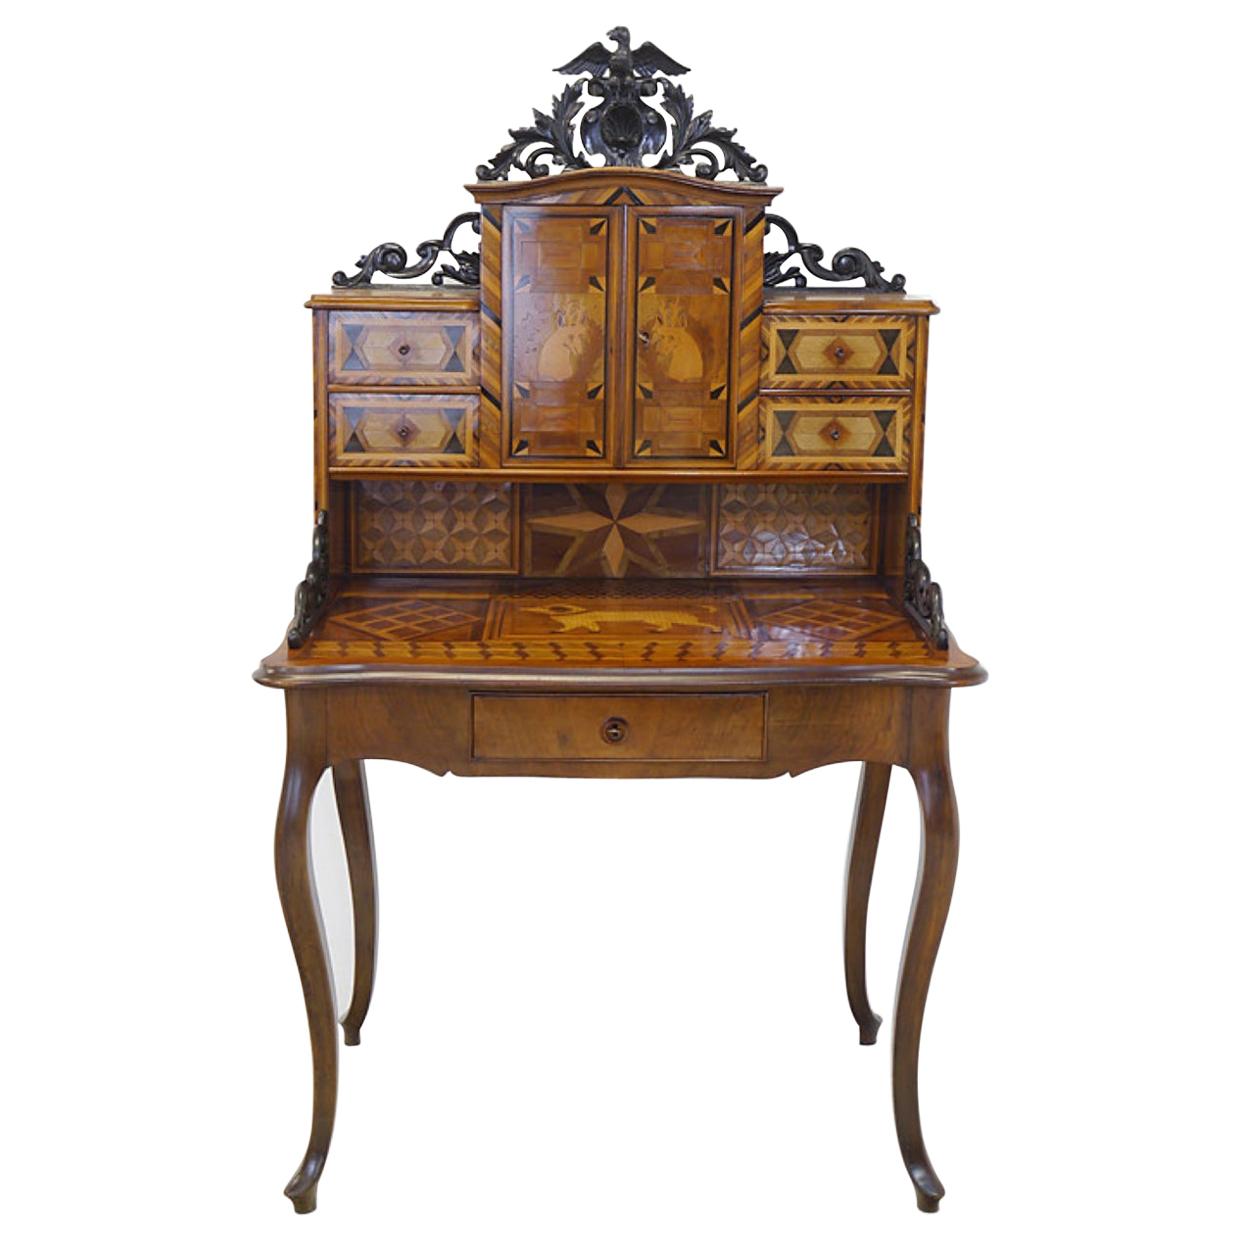 Historicism Desk circa 1880 Made of Walnut with Inlay Works For Sale